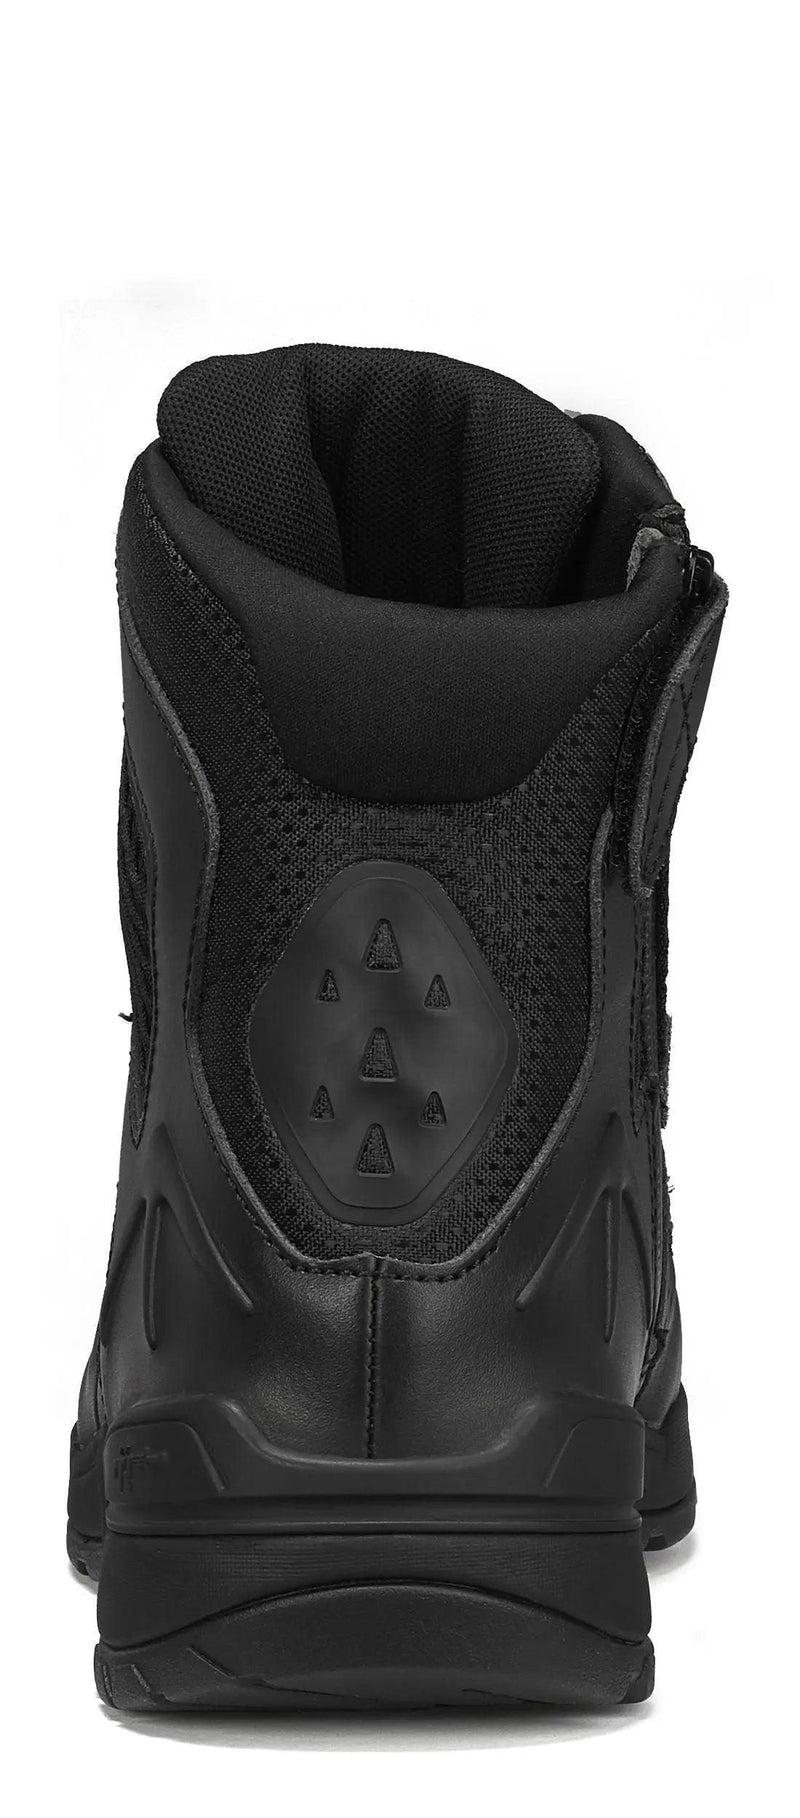 Belleville Tactical Research Waterproof duty Boot TR1040-ZWP - BootSolution